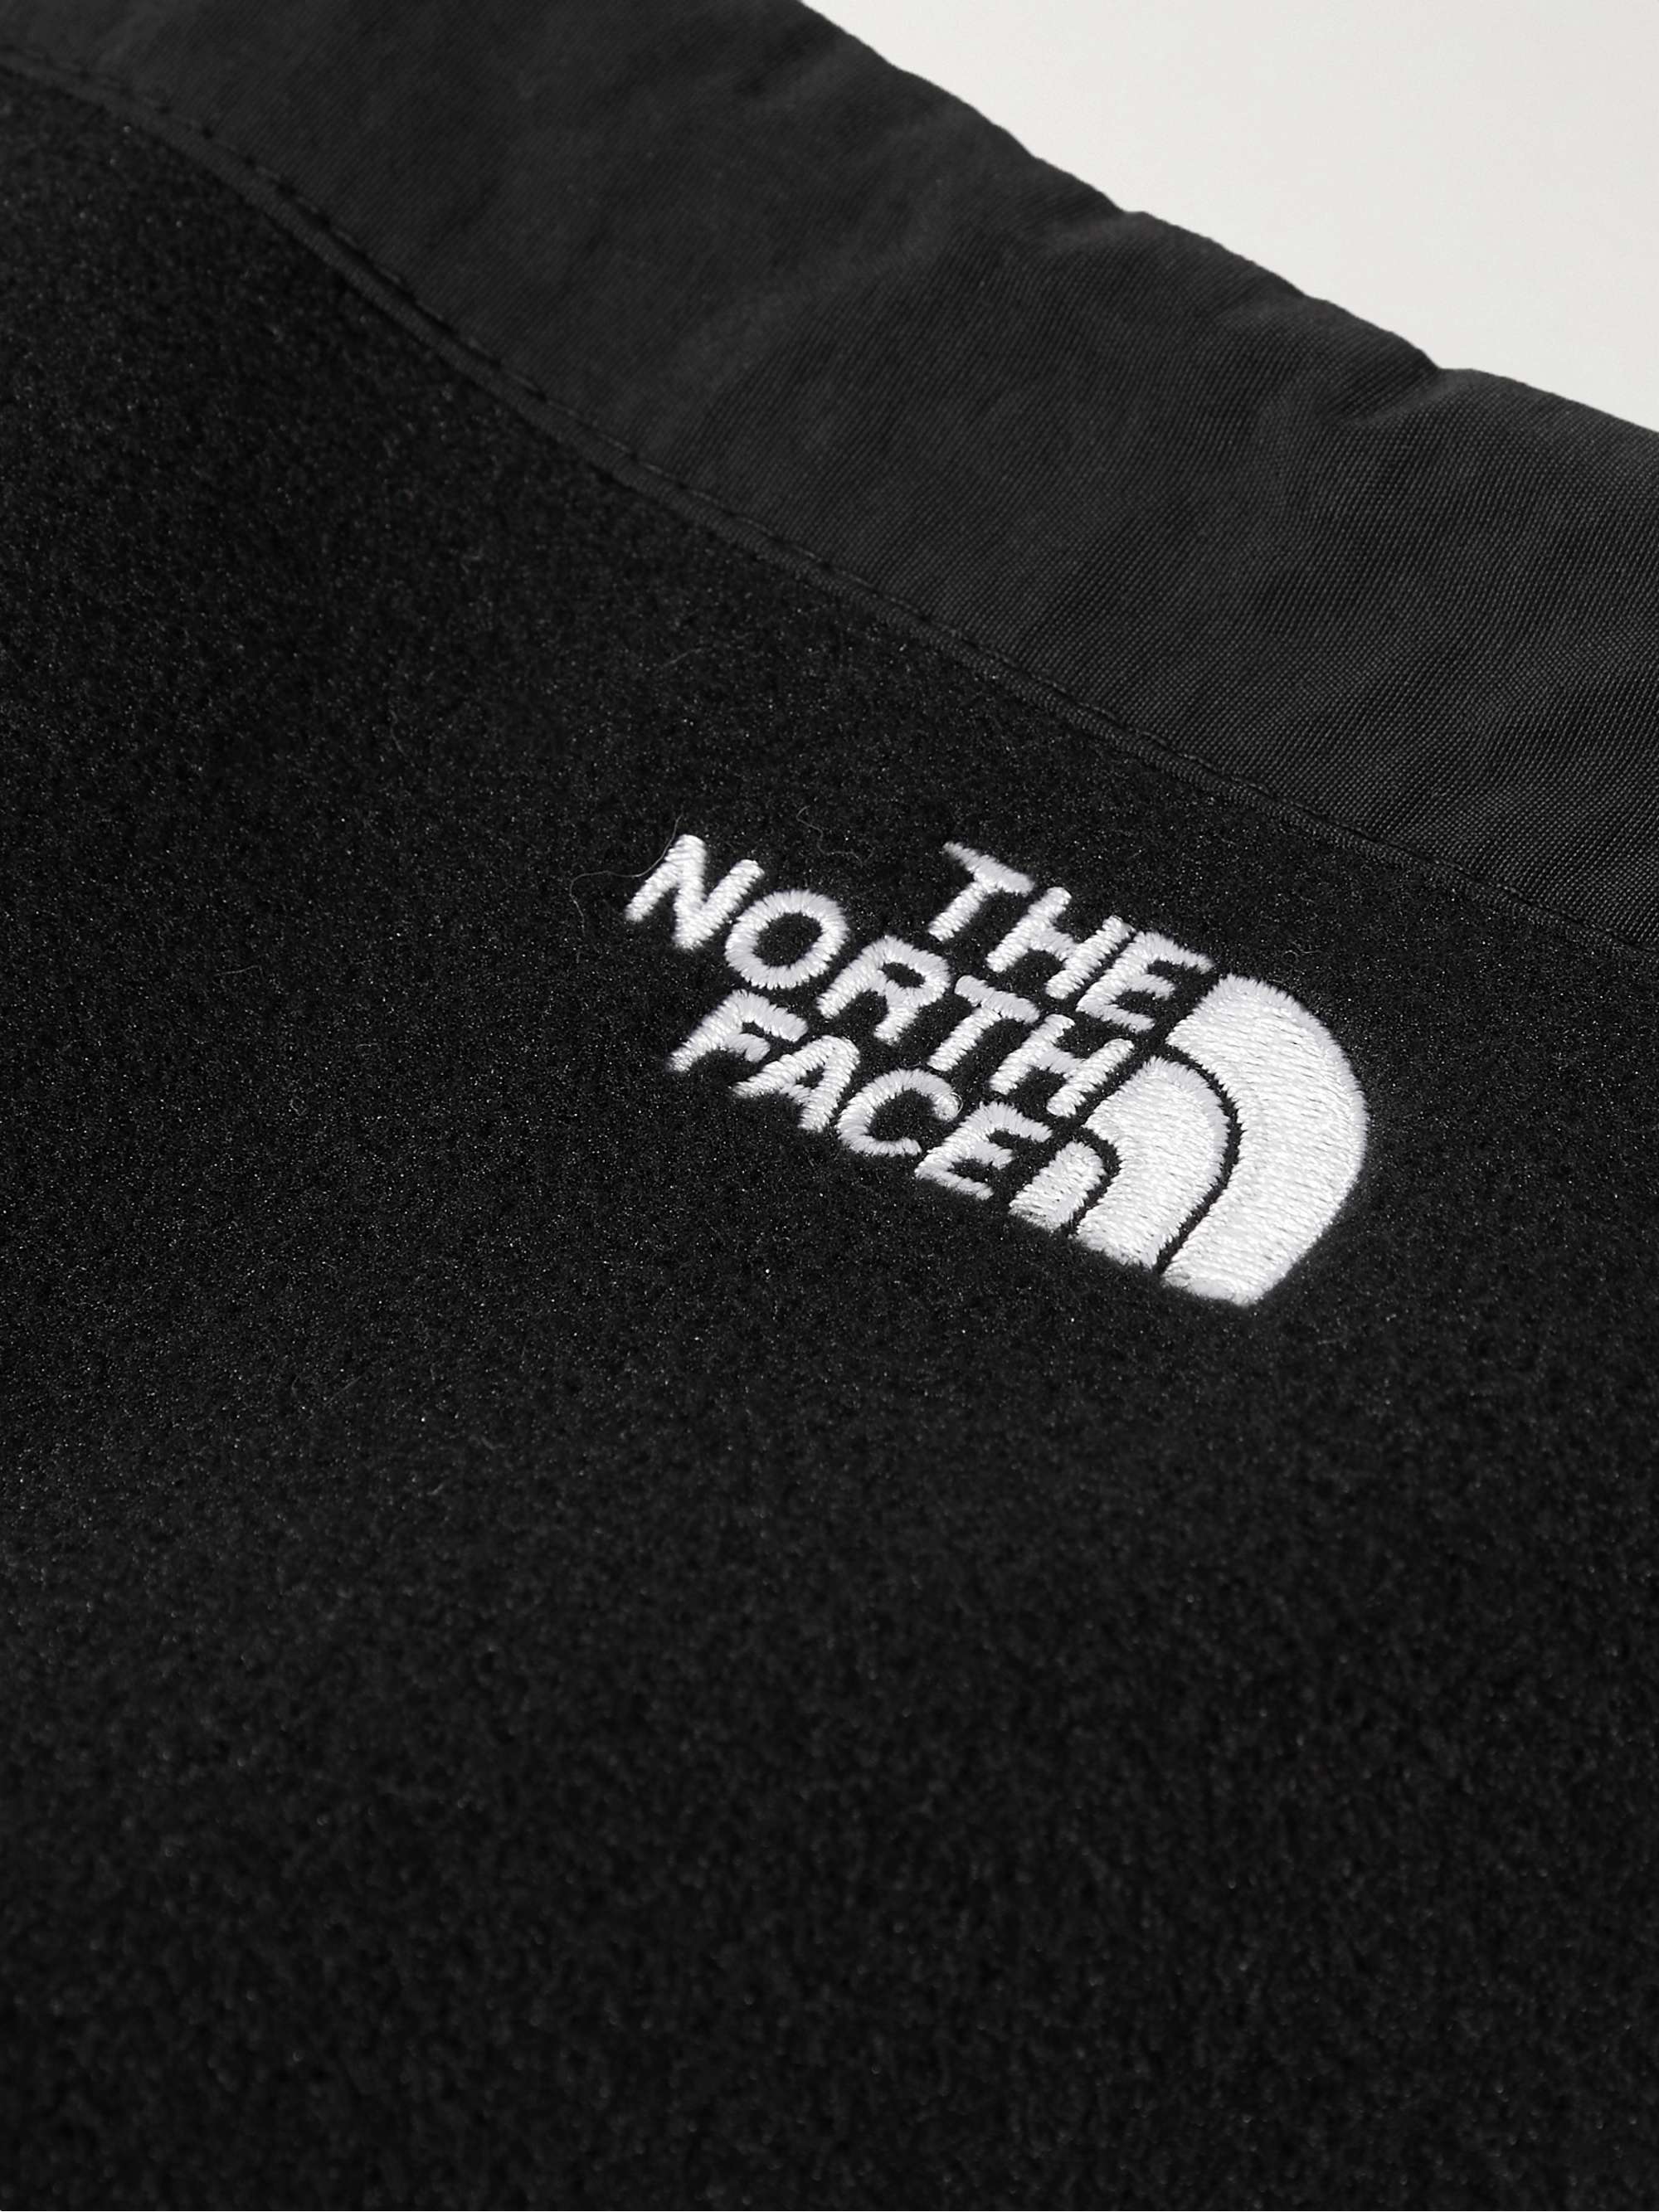 THE NORTH FACE Shell-Trimmed Fleece Neck Warmer